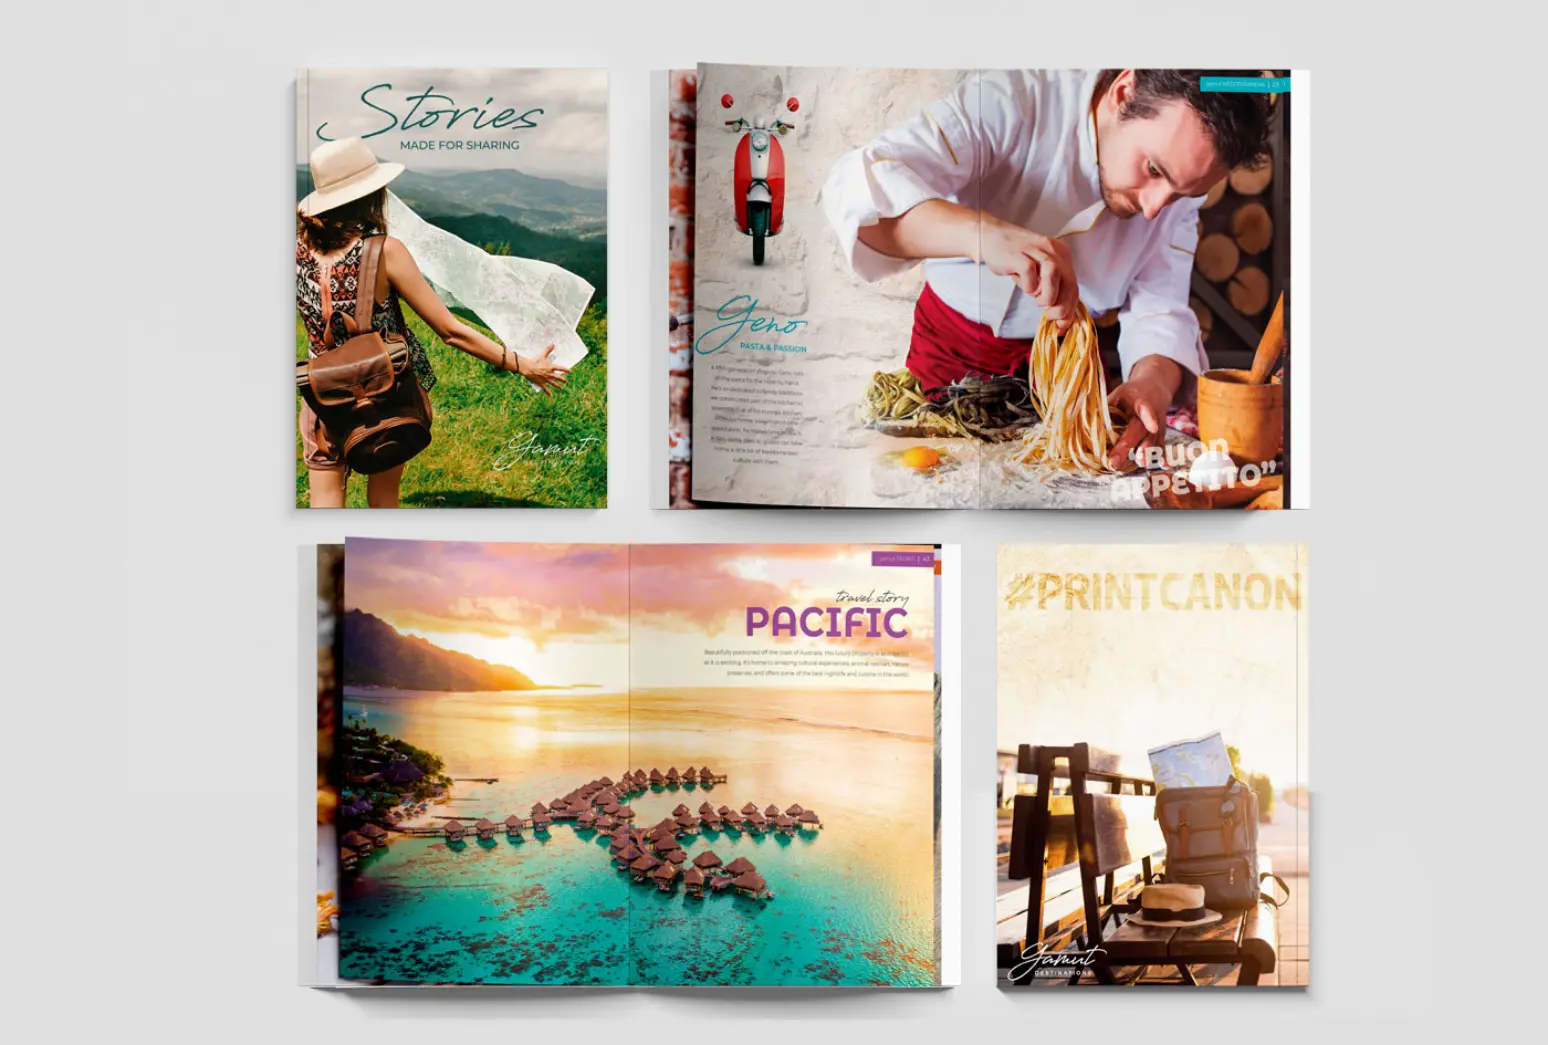 Covers and spreads from two travel-related books we created that are among Canon's most requested samples.